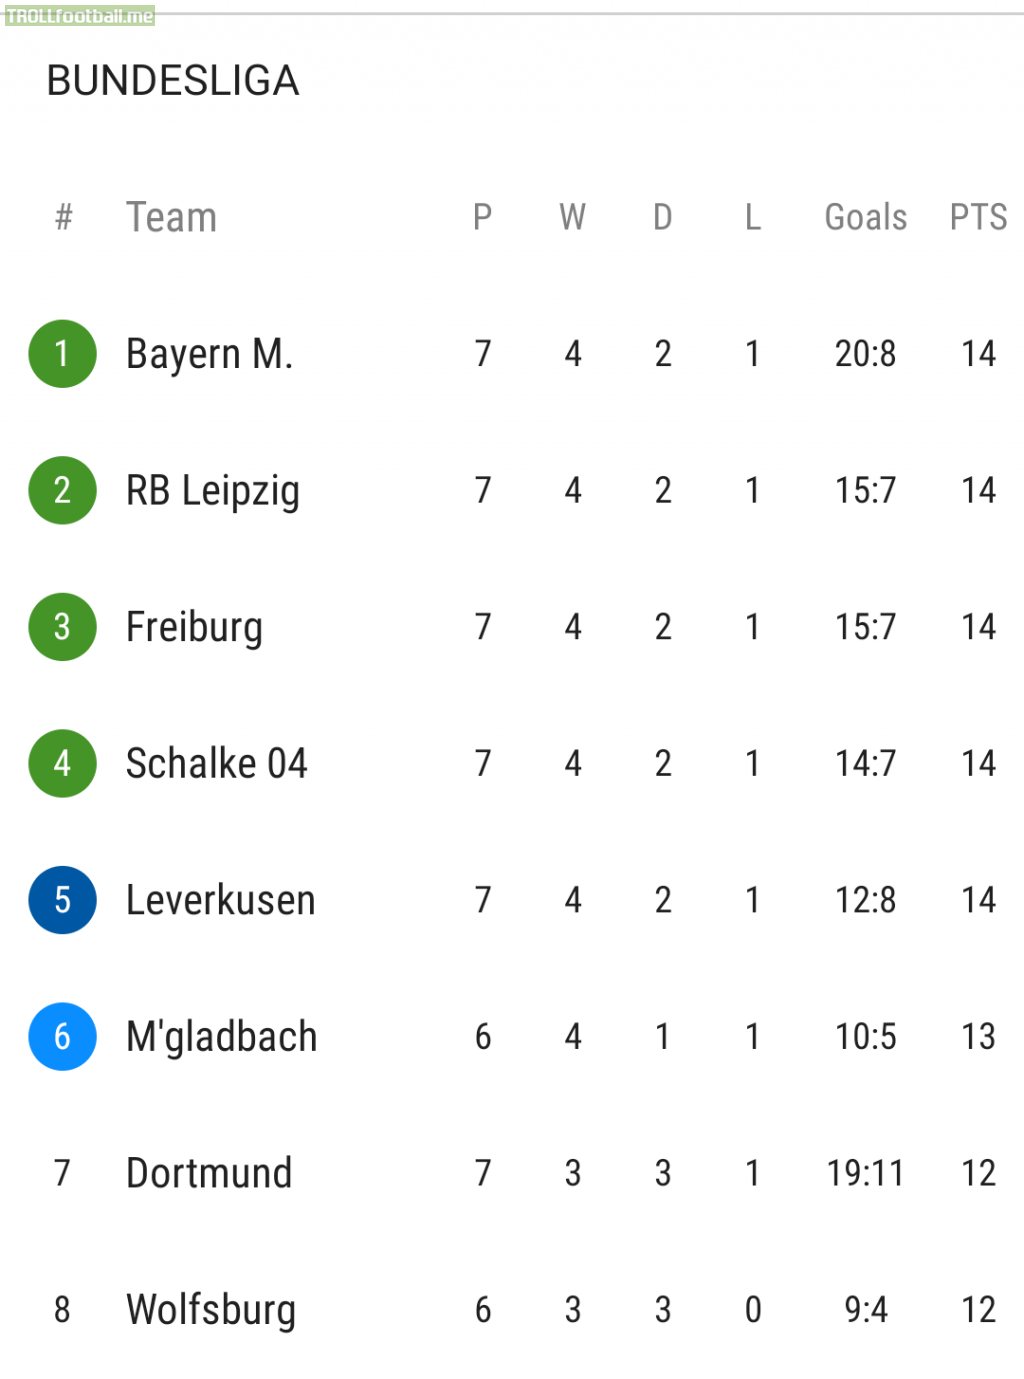 As of now, the top 5 of the Bundesliga have the same amount of points